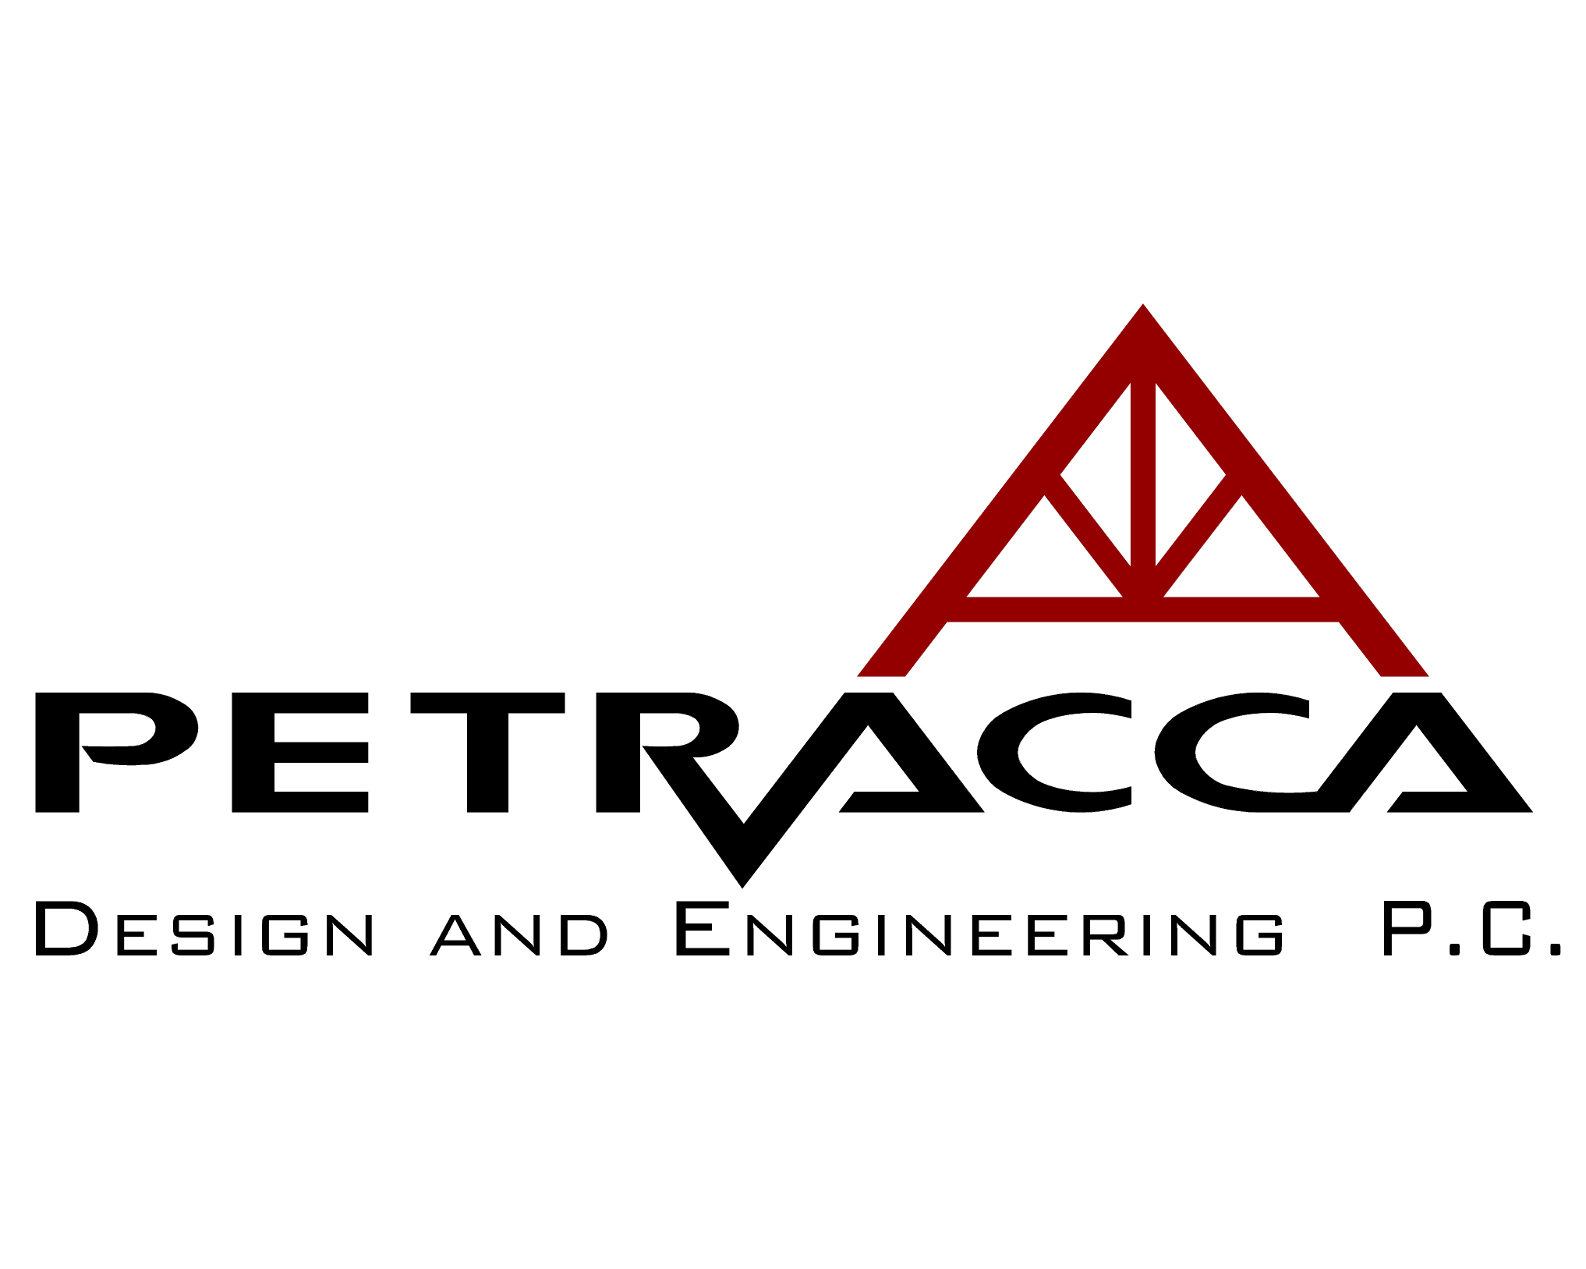 Petracca Design and Engineering, PC